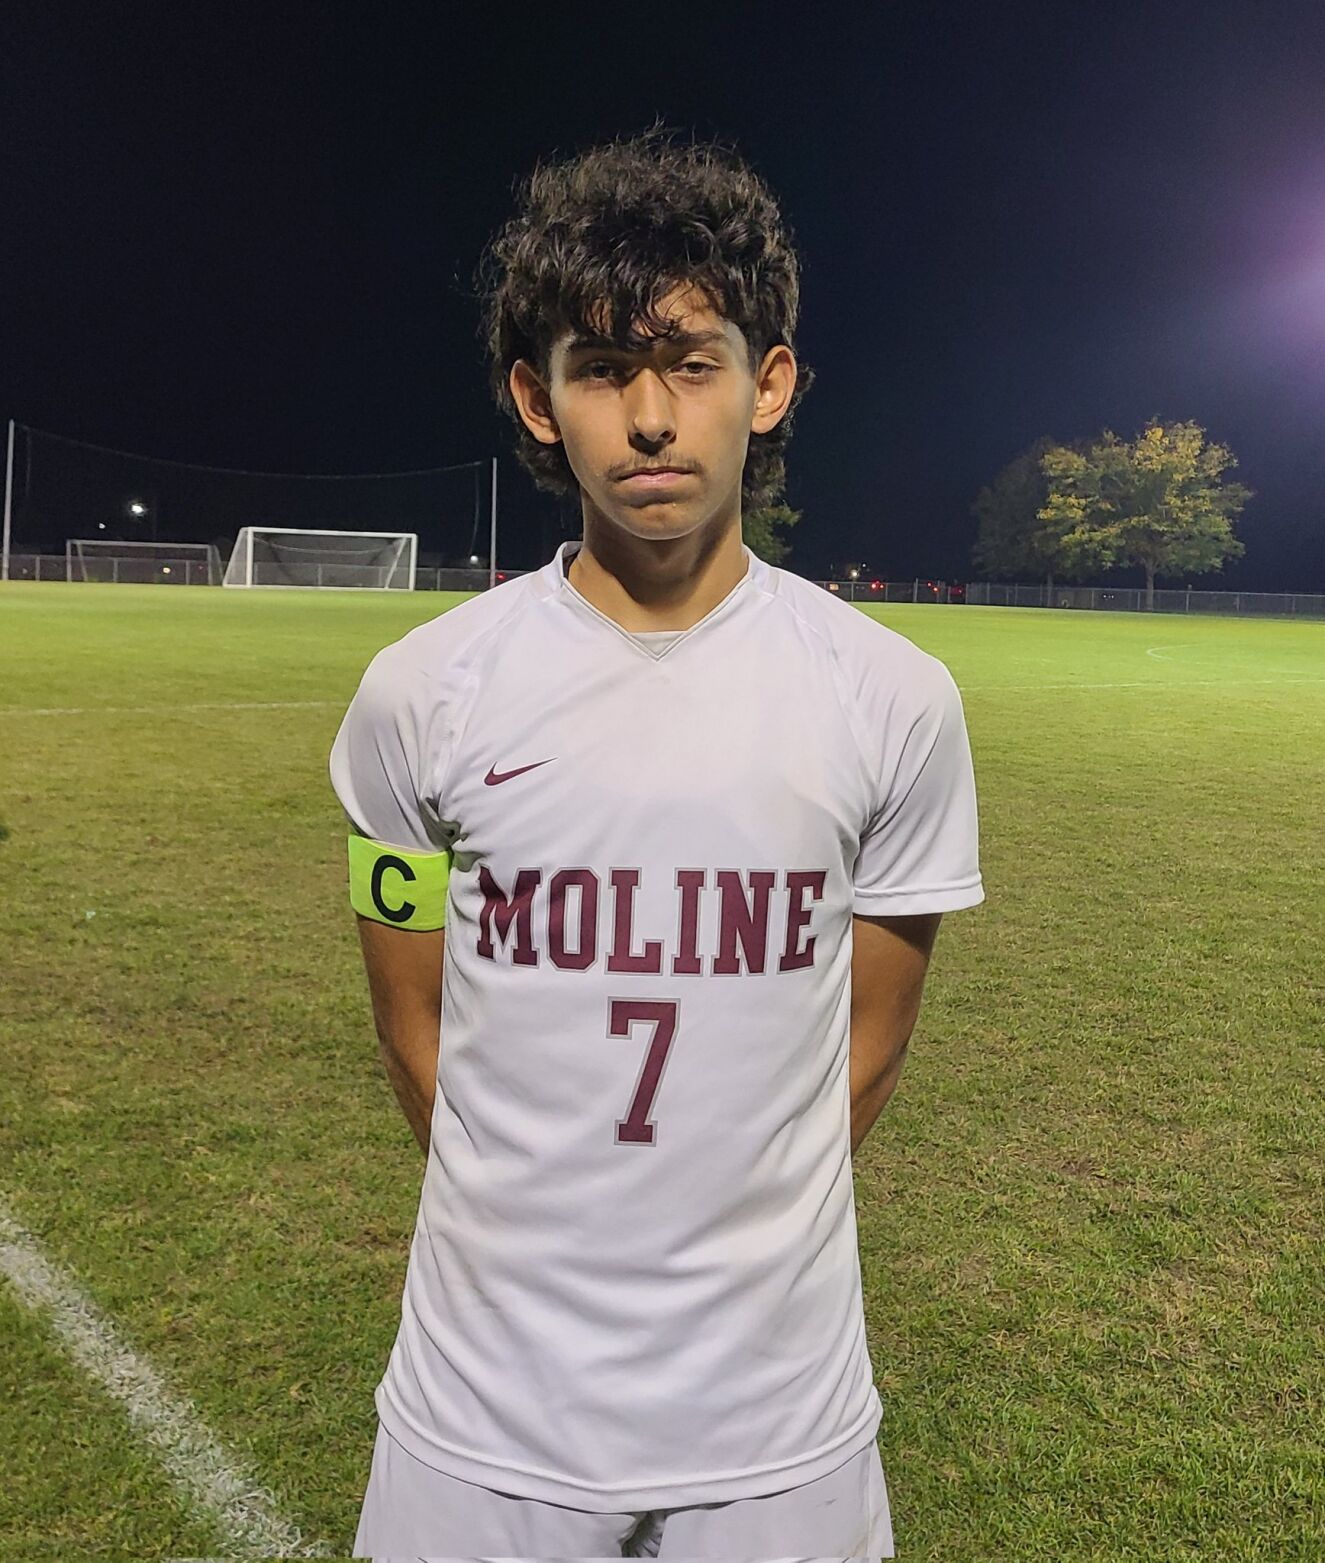 Moline boys soccer team dominates United Township with a 3-0 victory